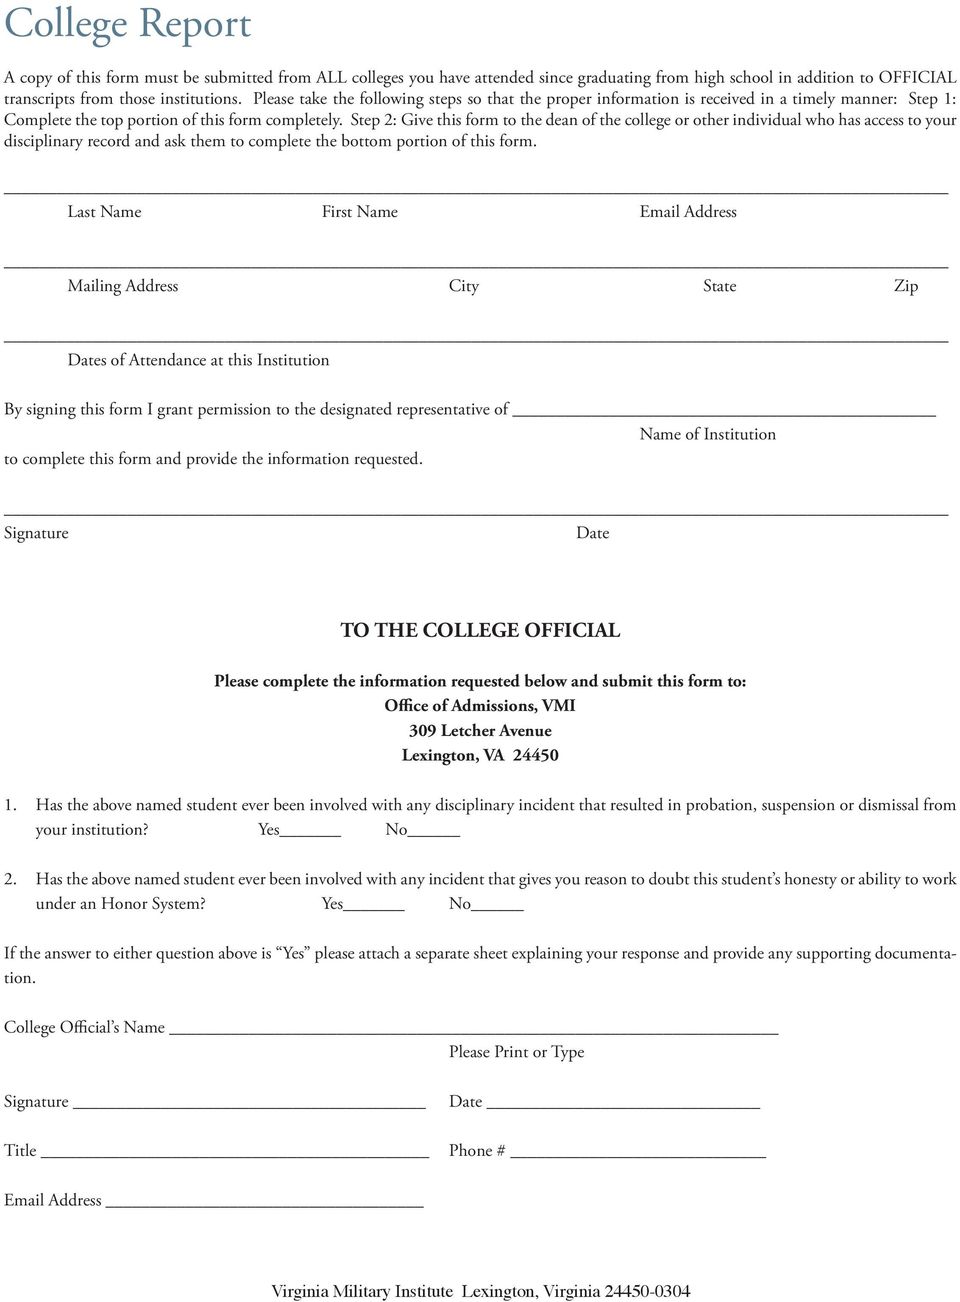 Step 2: Give this form to the dean of the college or other individual who has access to your disciplinary record and ask them to complete the bottom portion of this form.